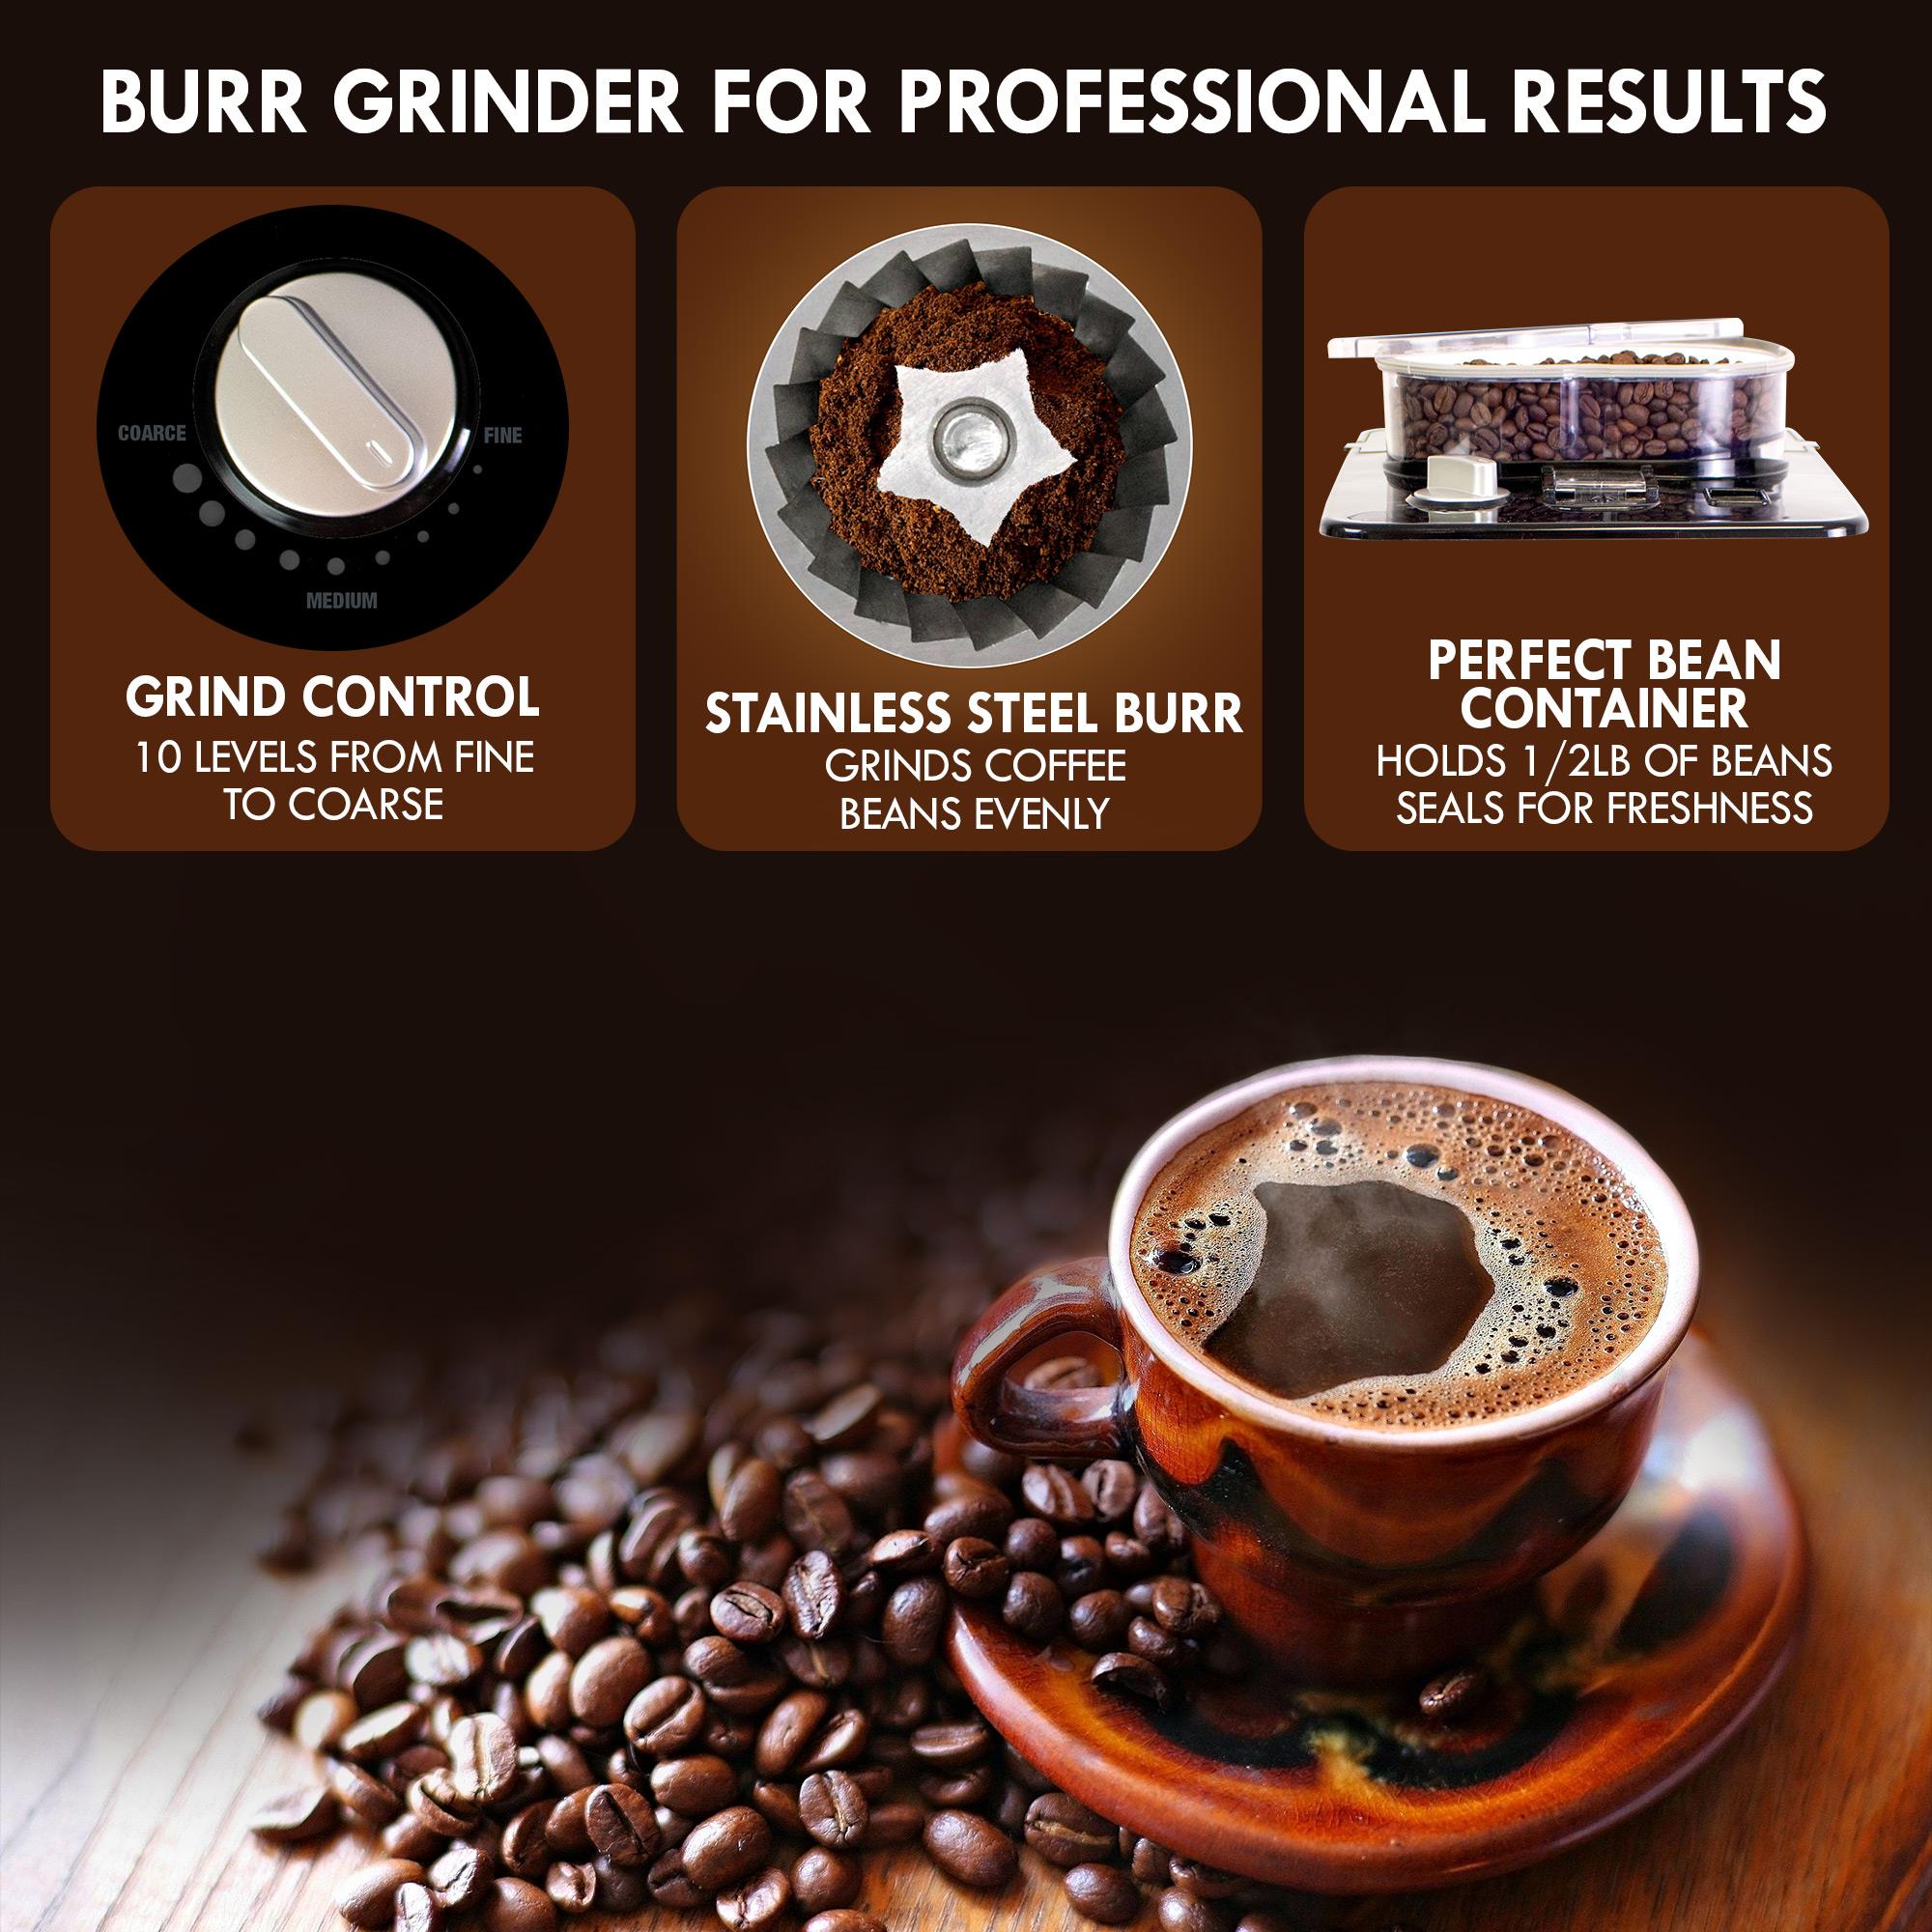 Breville The Grind Control Coffee Grinder (Stainless) 